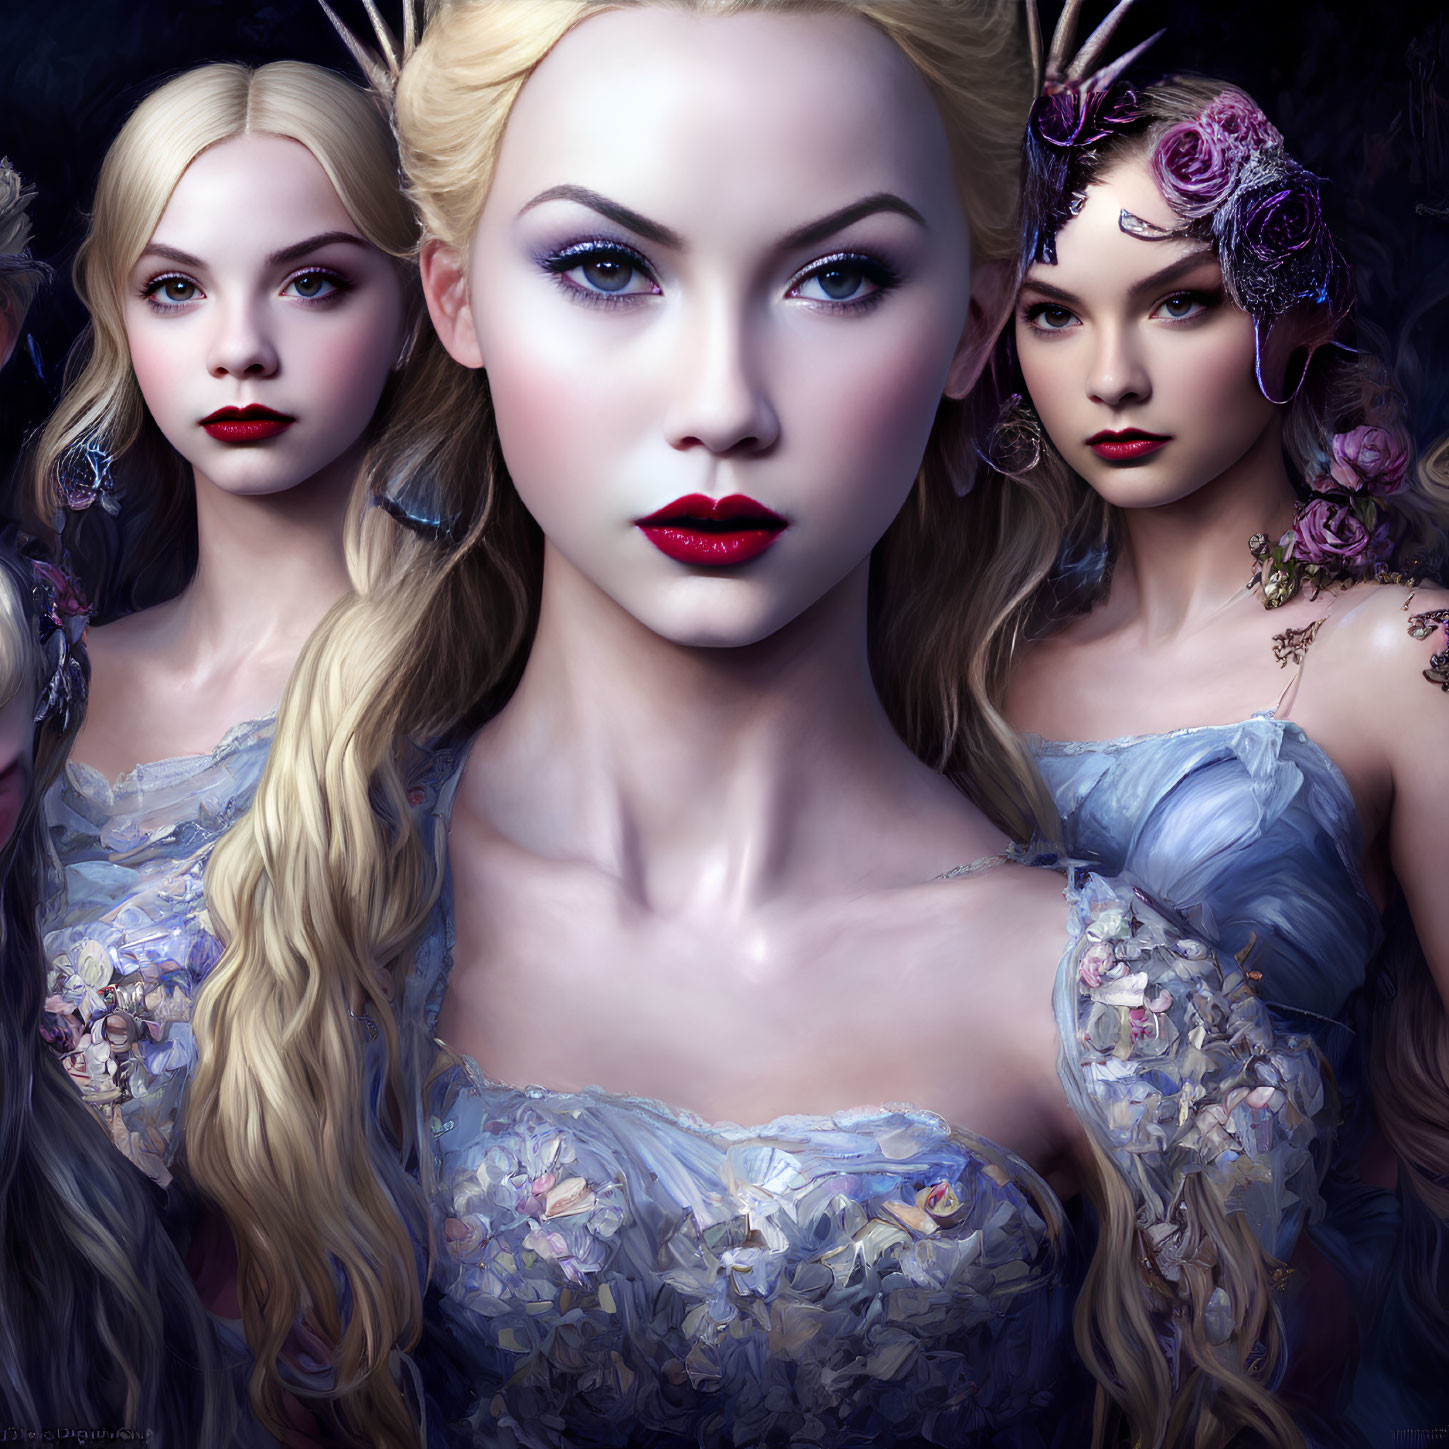 Ethereal women with pale skin and blond hair against dark backdrop